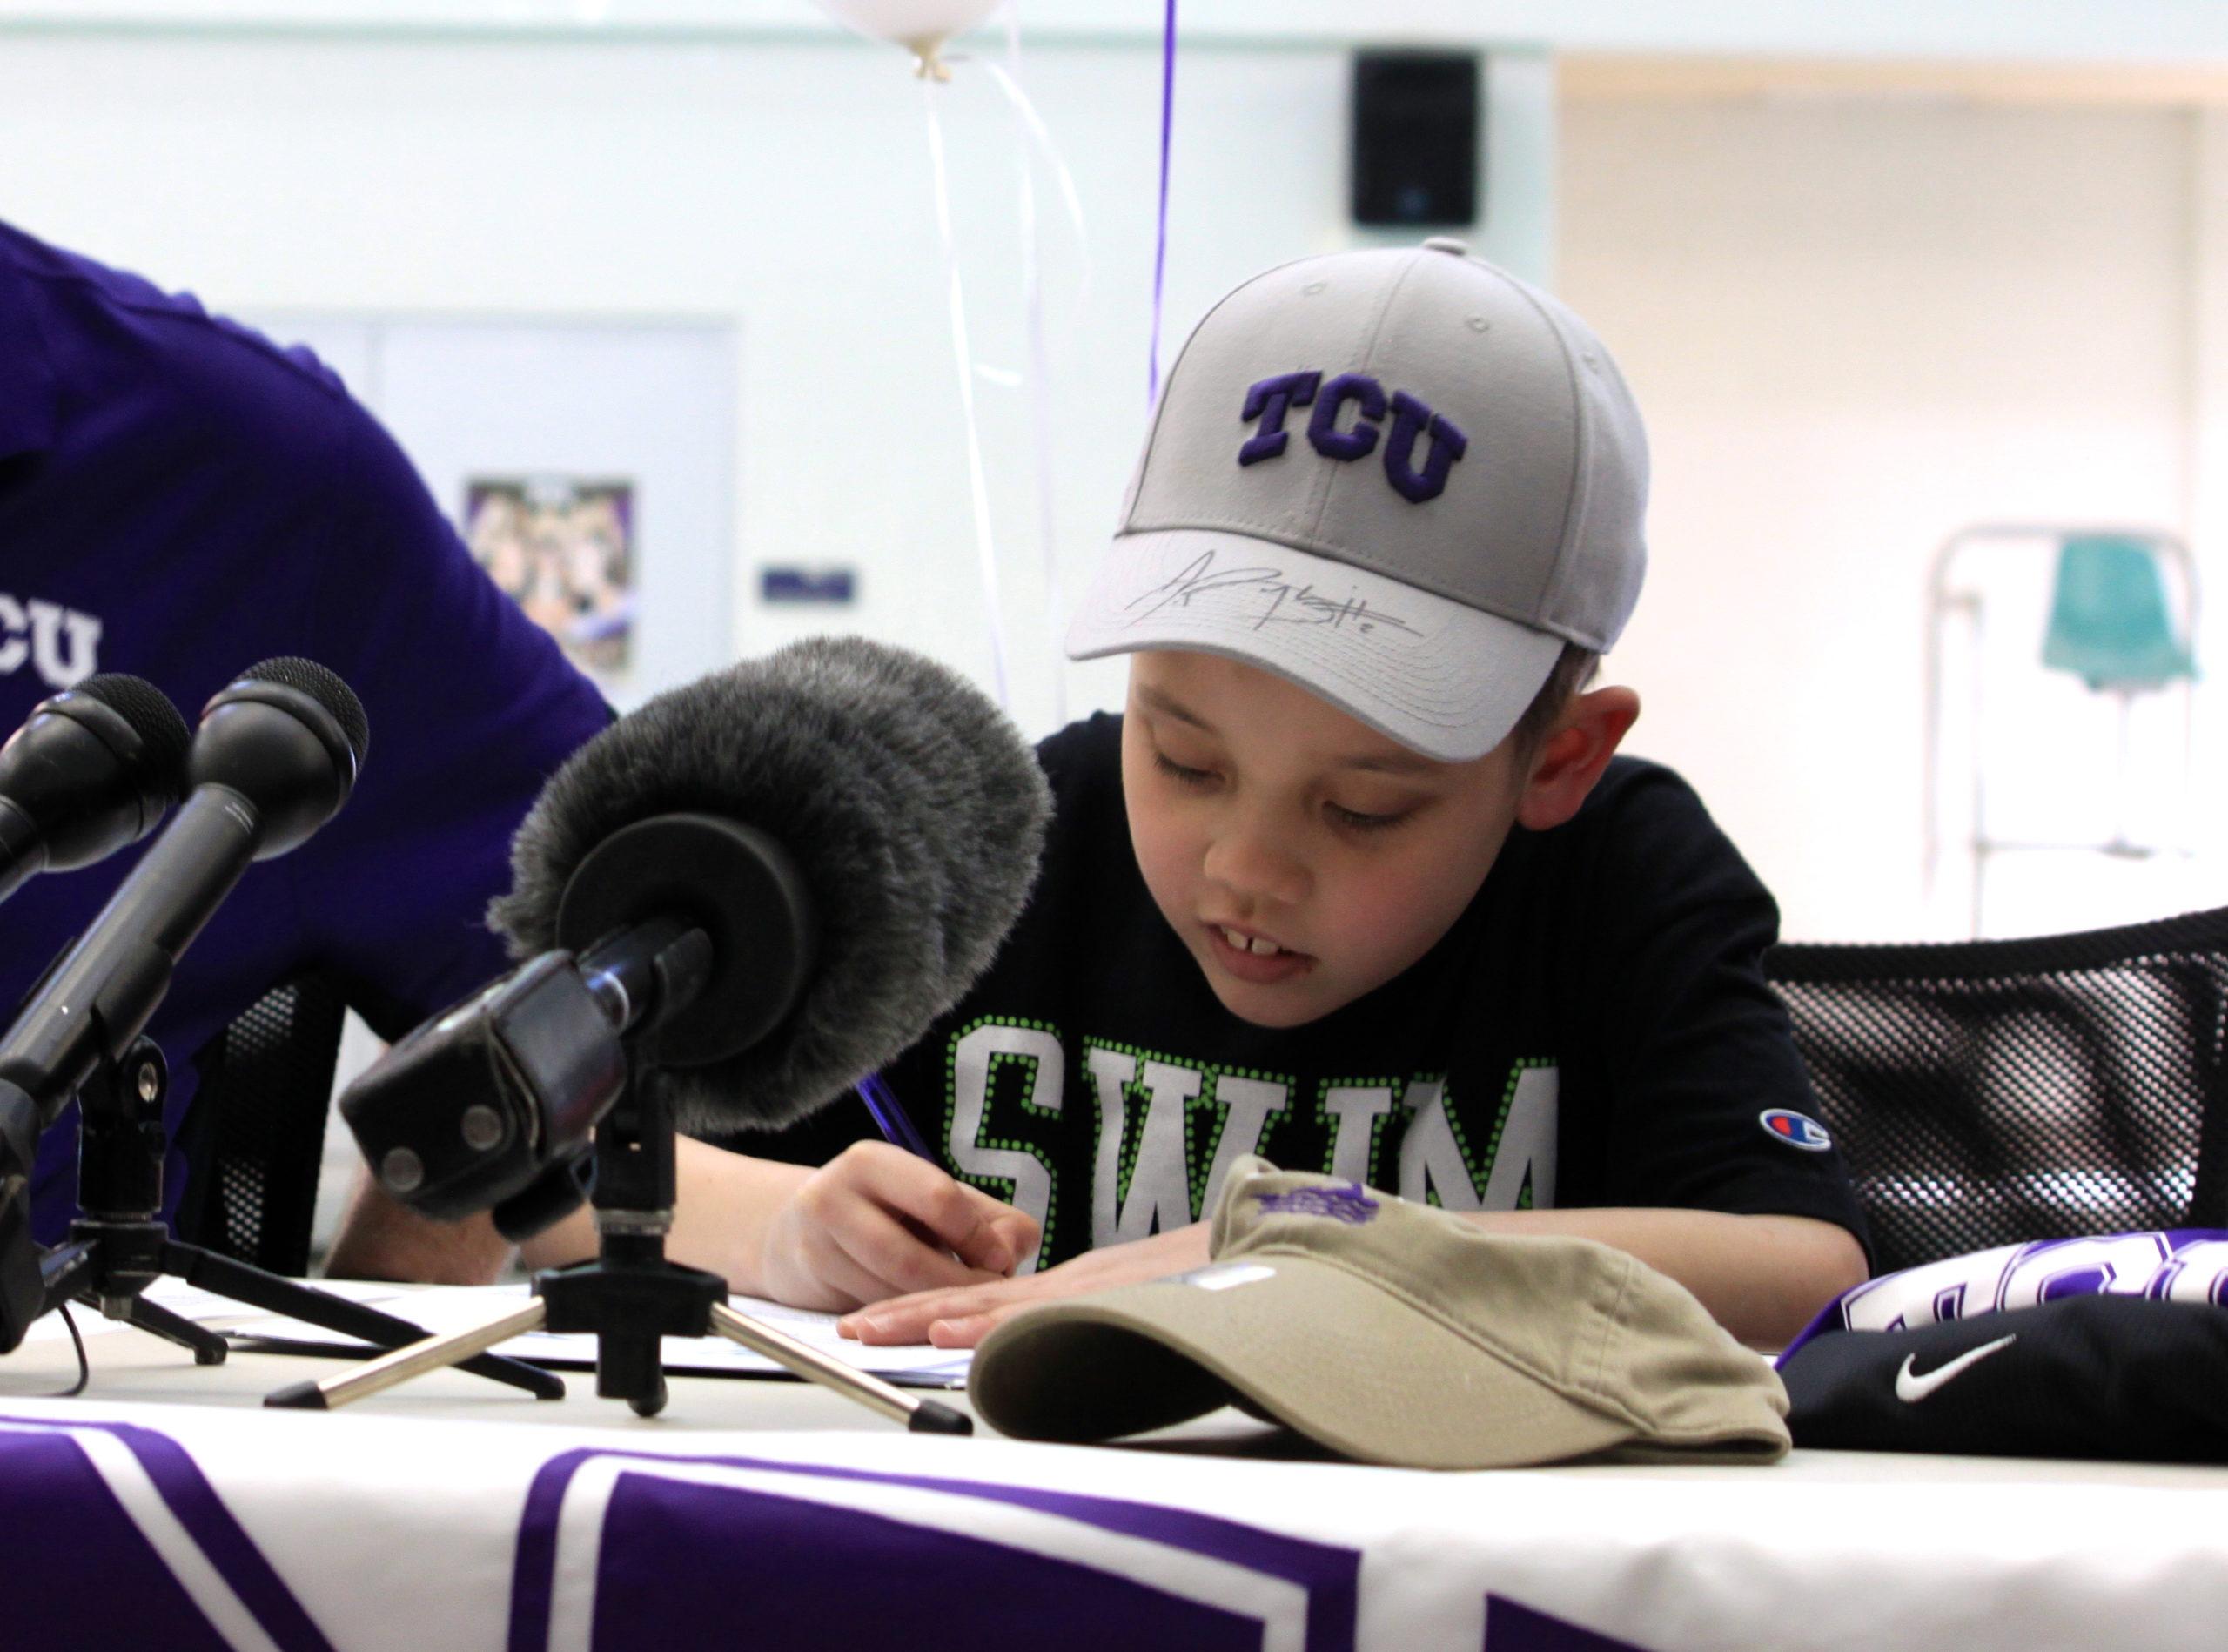 Nathan%2C+who+had+a+brain+tumor+removed+last+year%2C+is+now+an+honorary+Horned+Frog.+